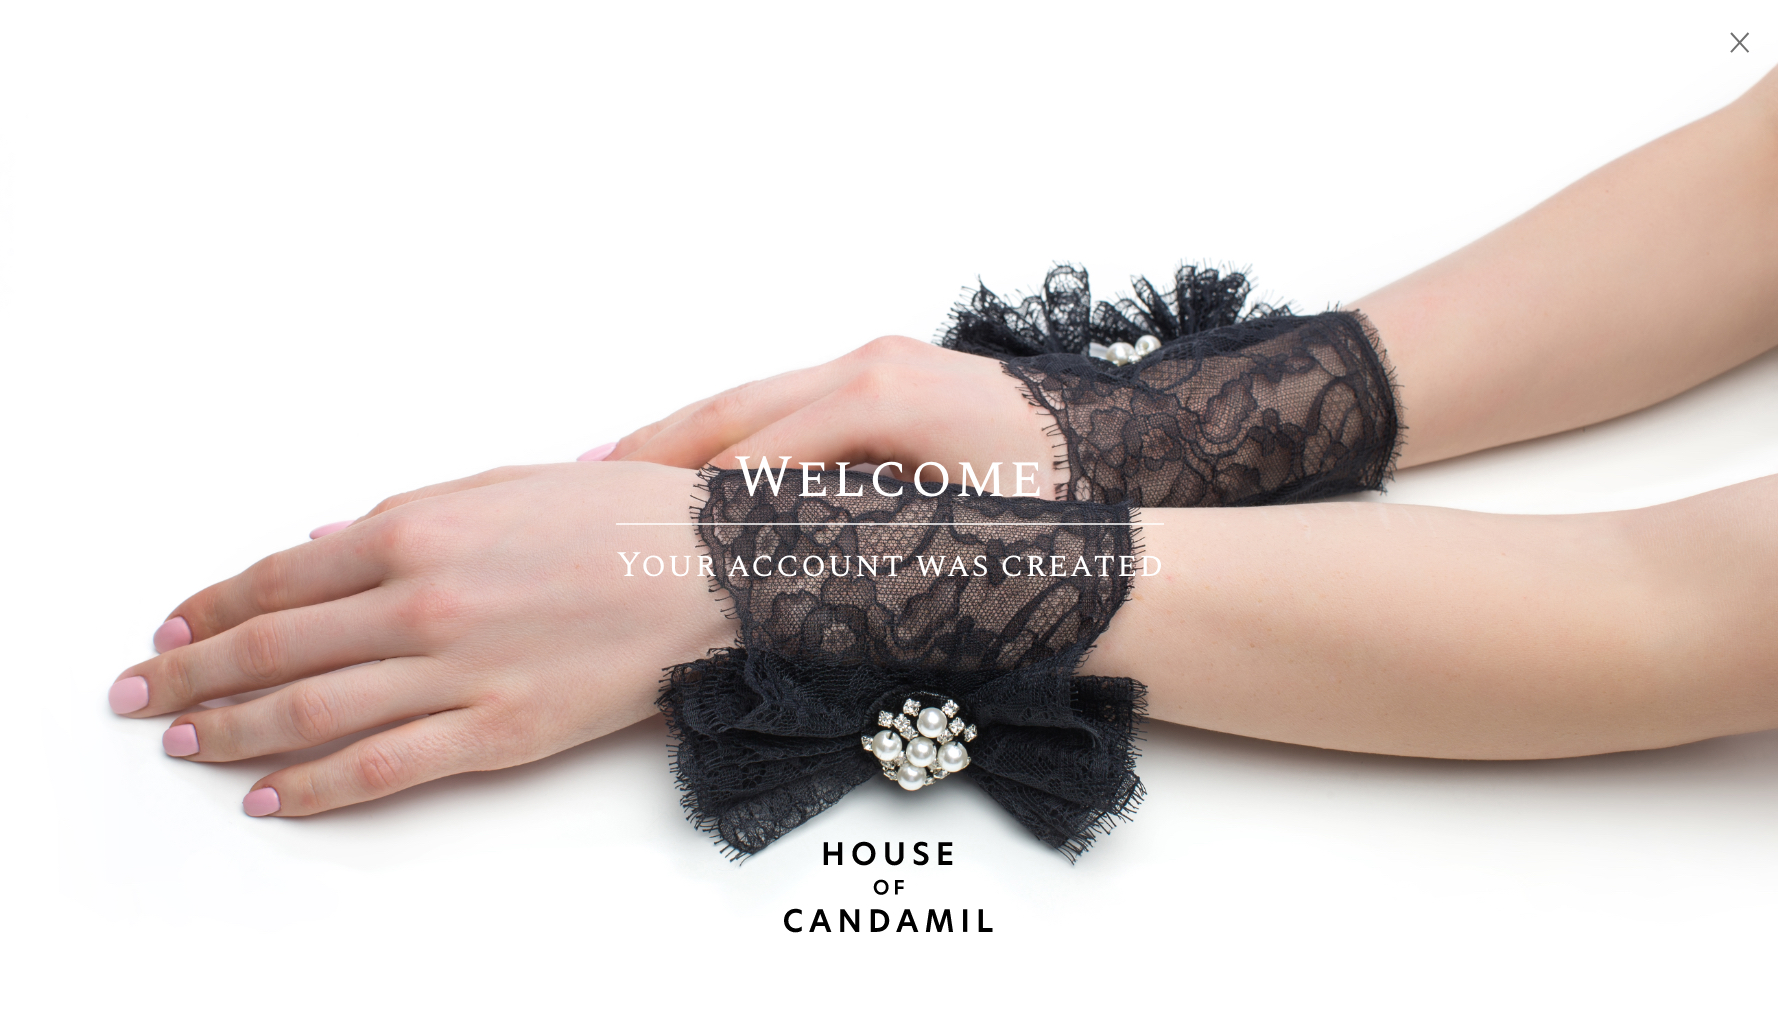 HOUSE OF CANDAMIL